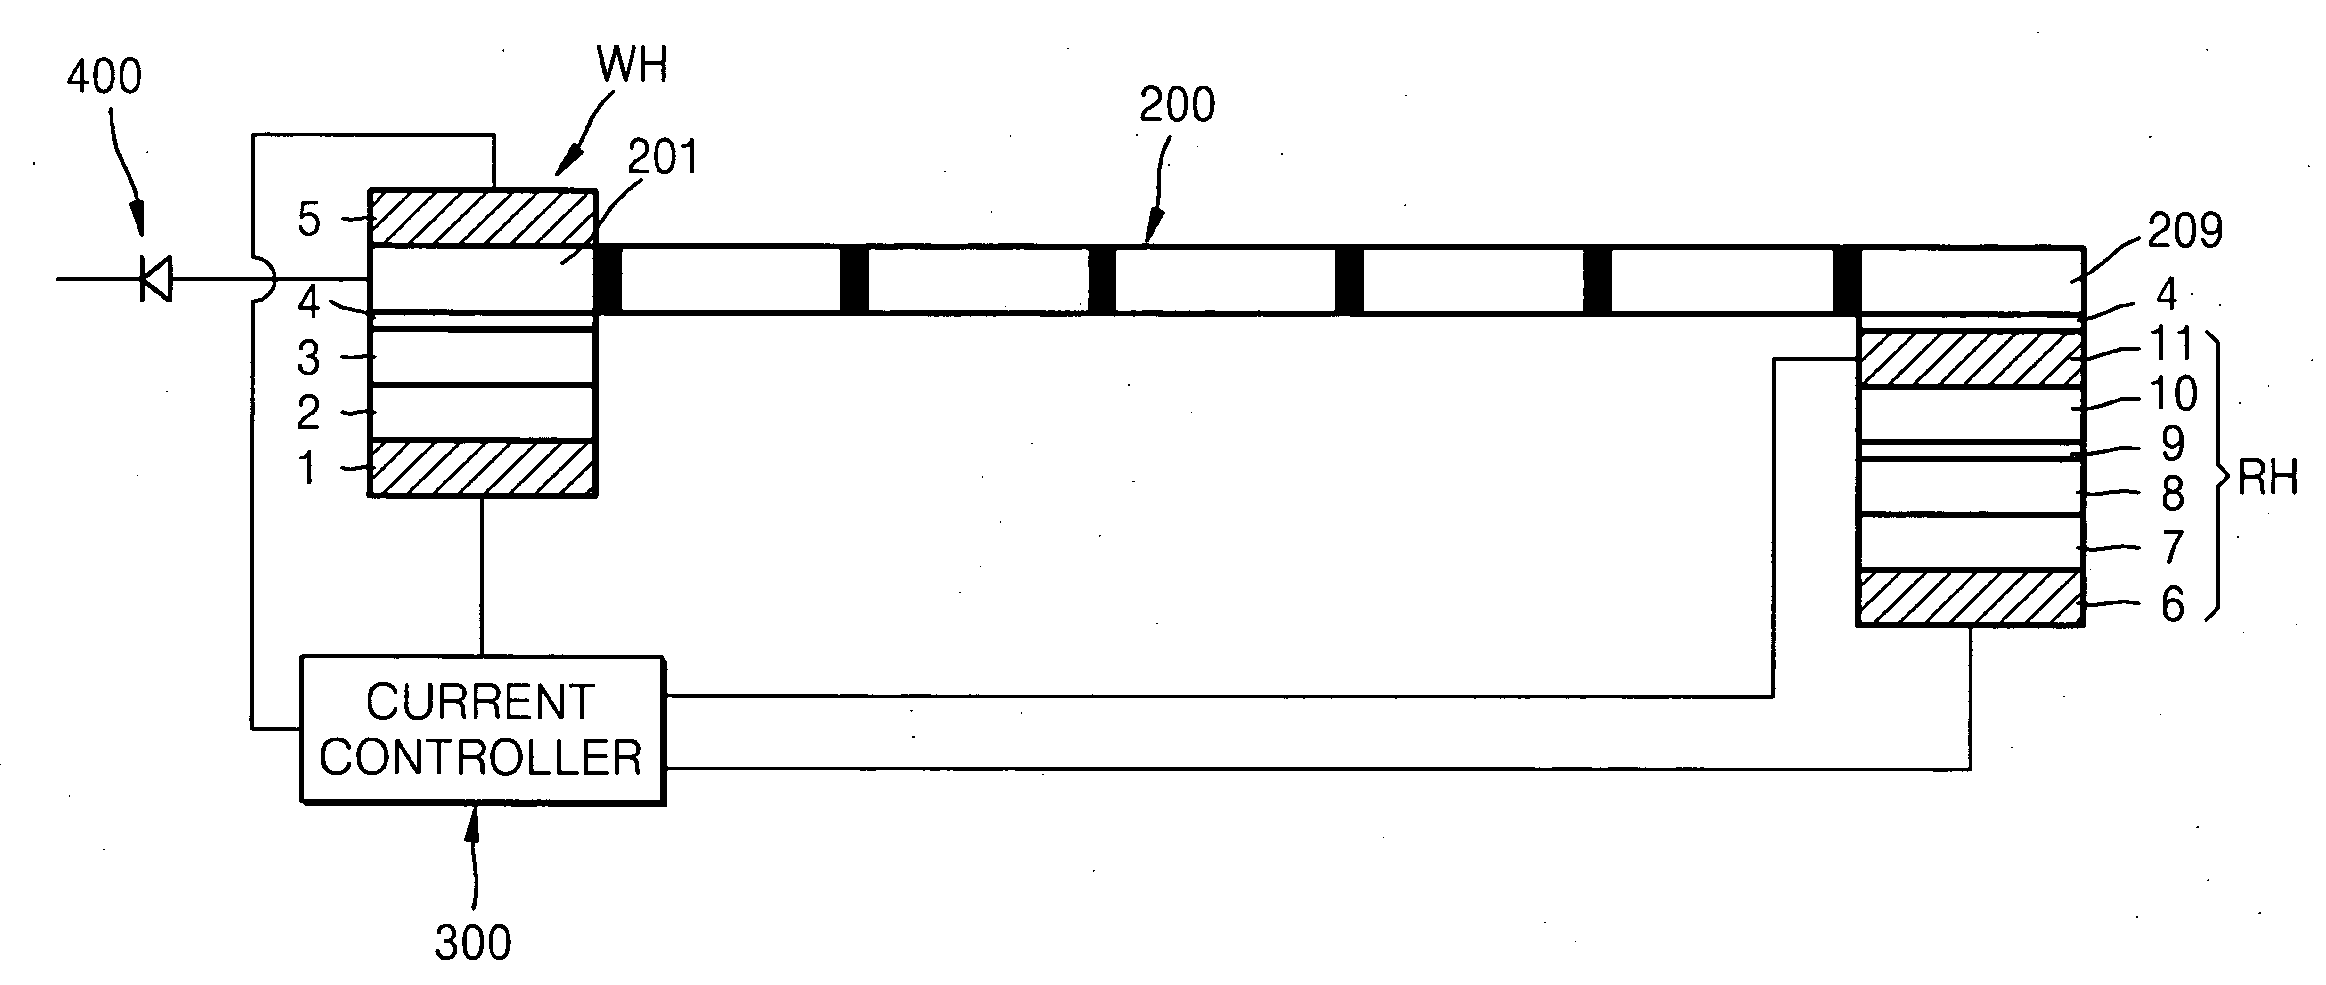 Data storage device using magnetic domain wall movement and method of operating the data storage device